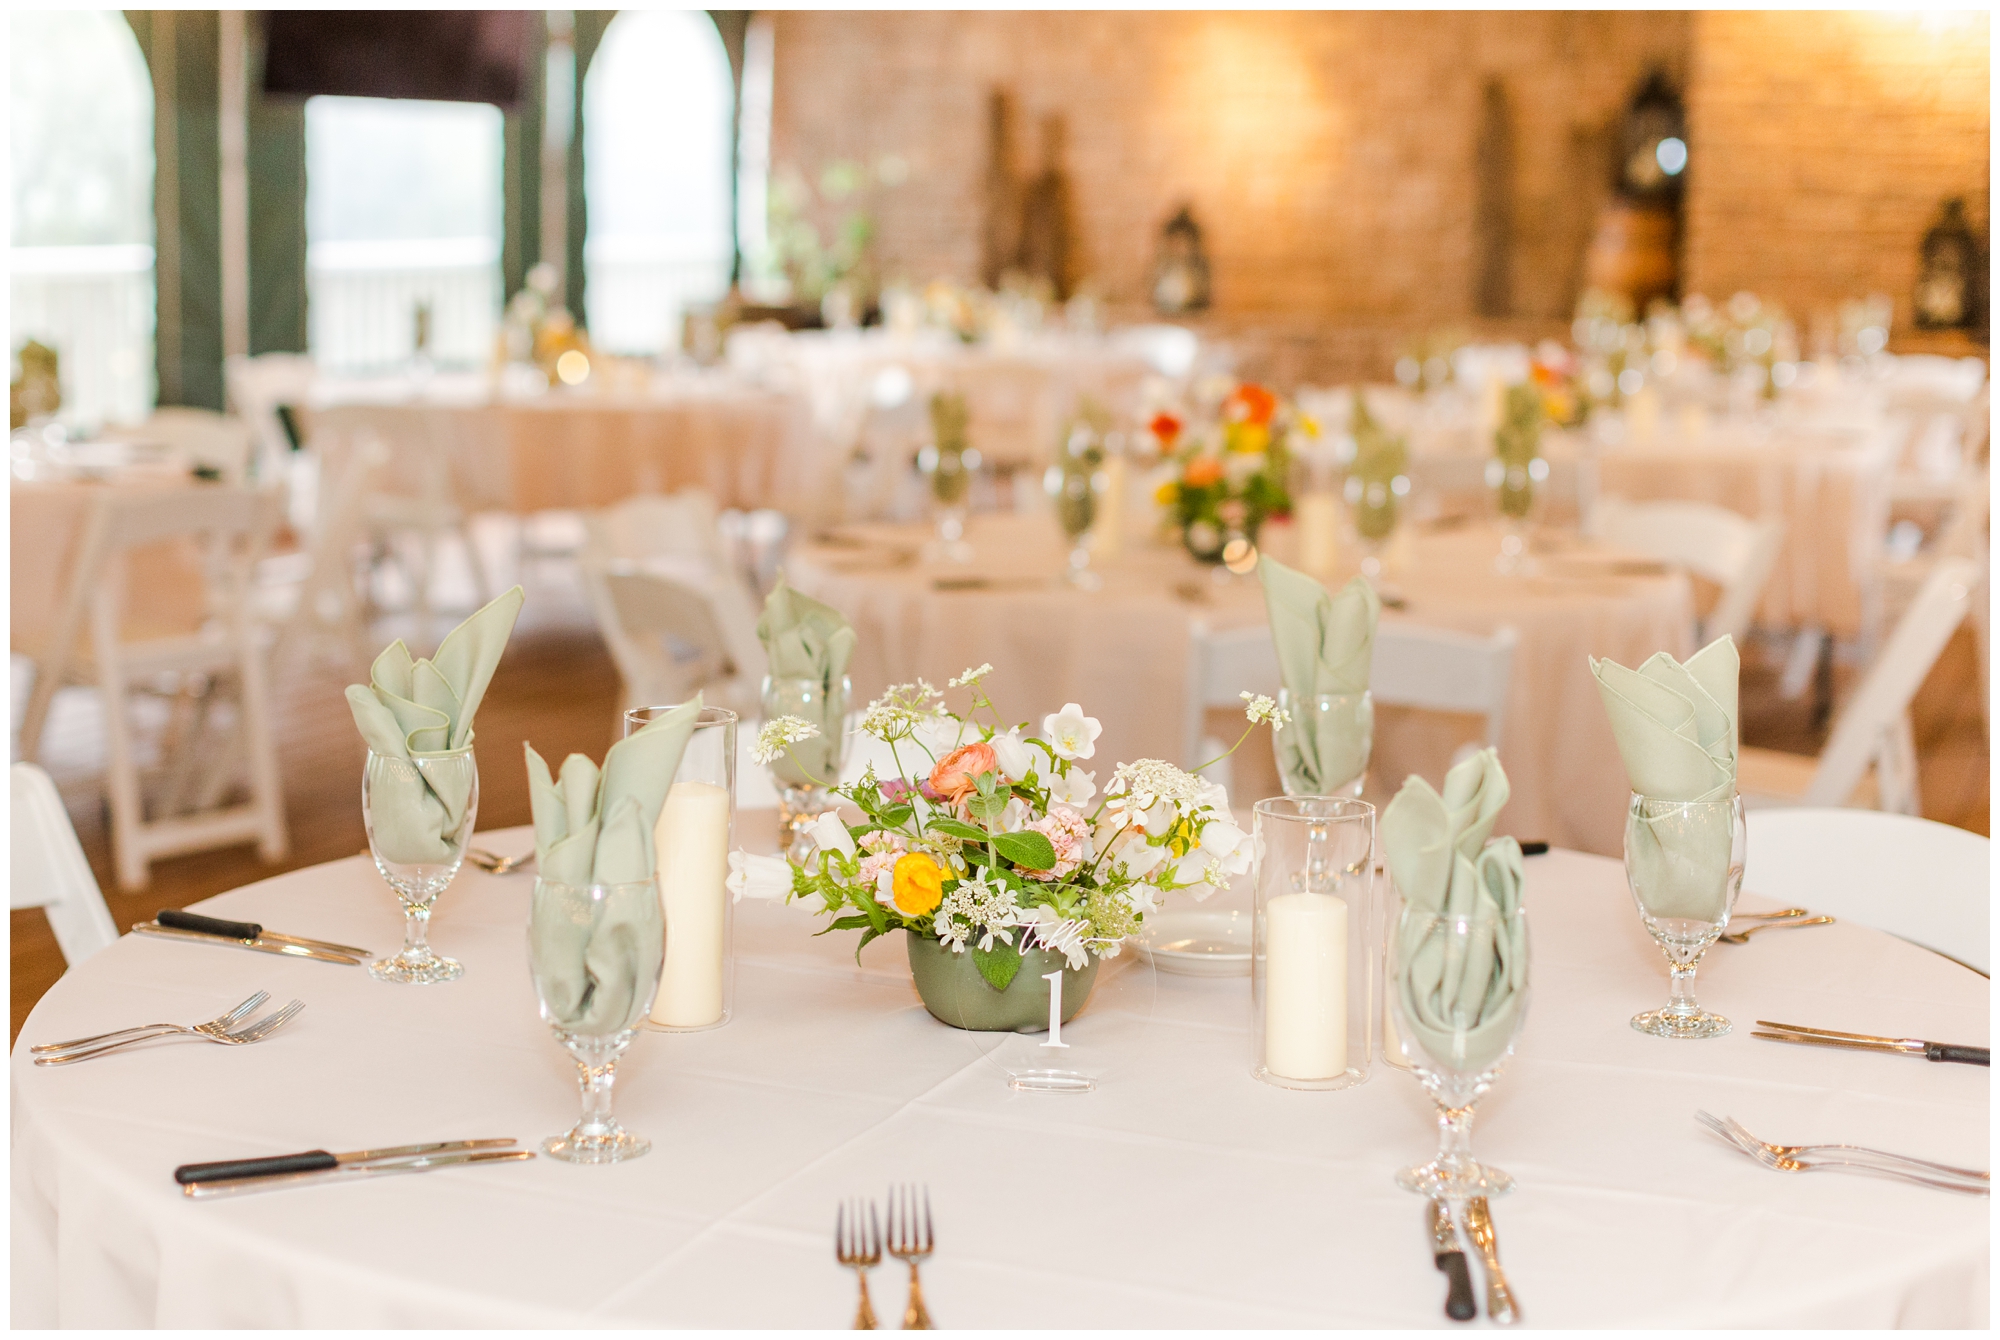 The reception space is pictured. The tables are covered in a pale linen and are surrounded with white wooden chairs. There are short floral arrangements on the tables. 